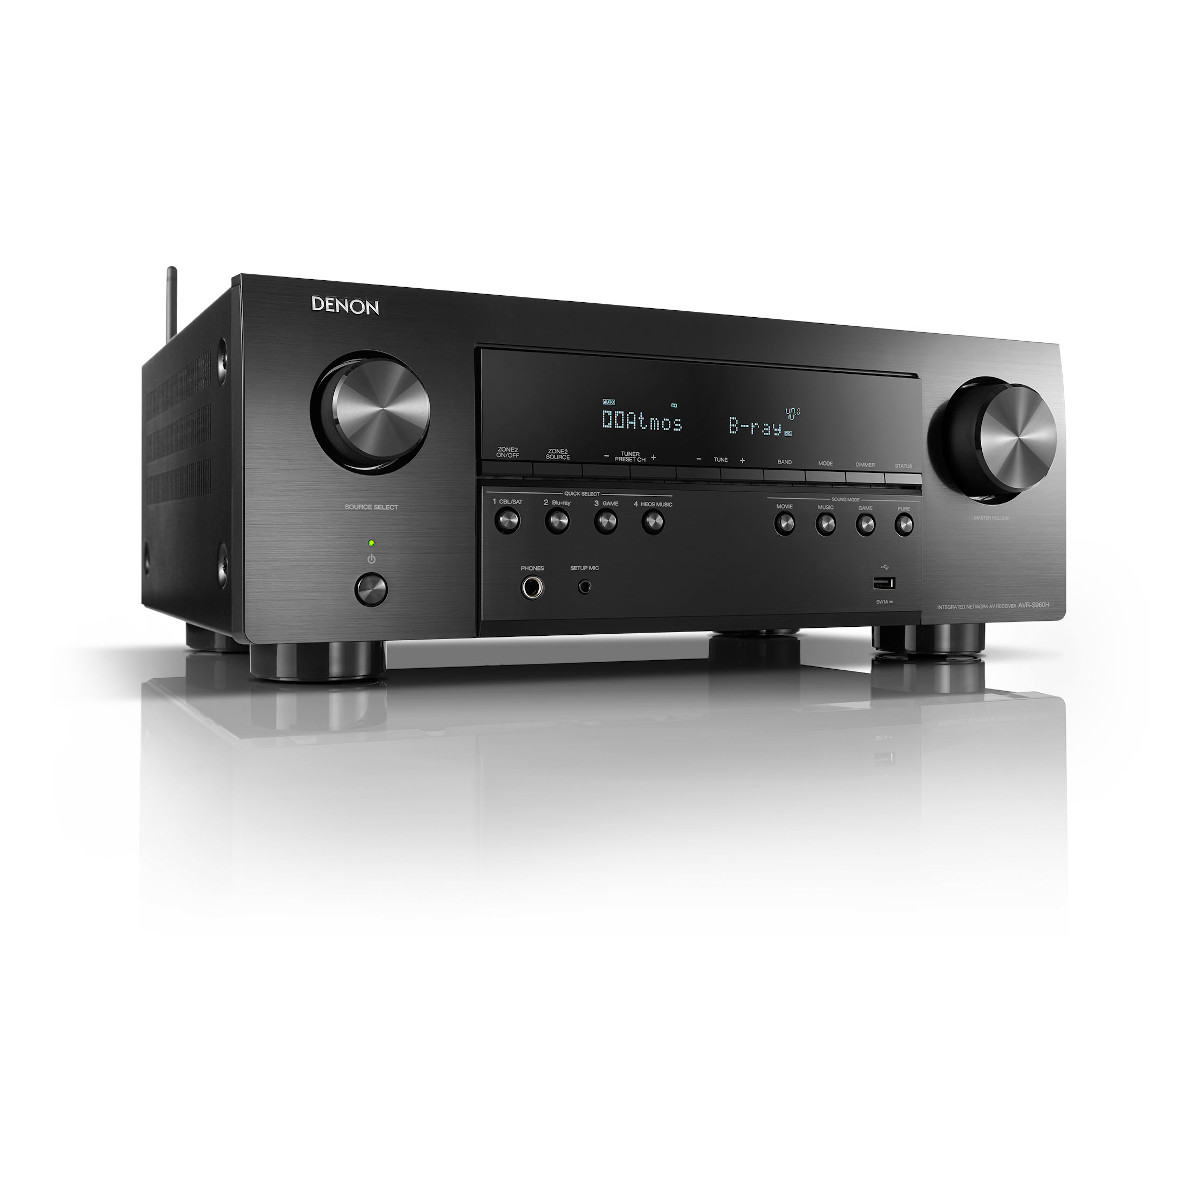 Denon AVR-S960H 7.2-Channel 4K Home Theater Receiver with 3D Audio and  Voice Control Voice Control - image 3 of 4